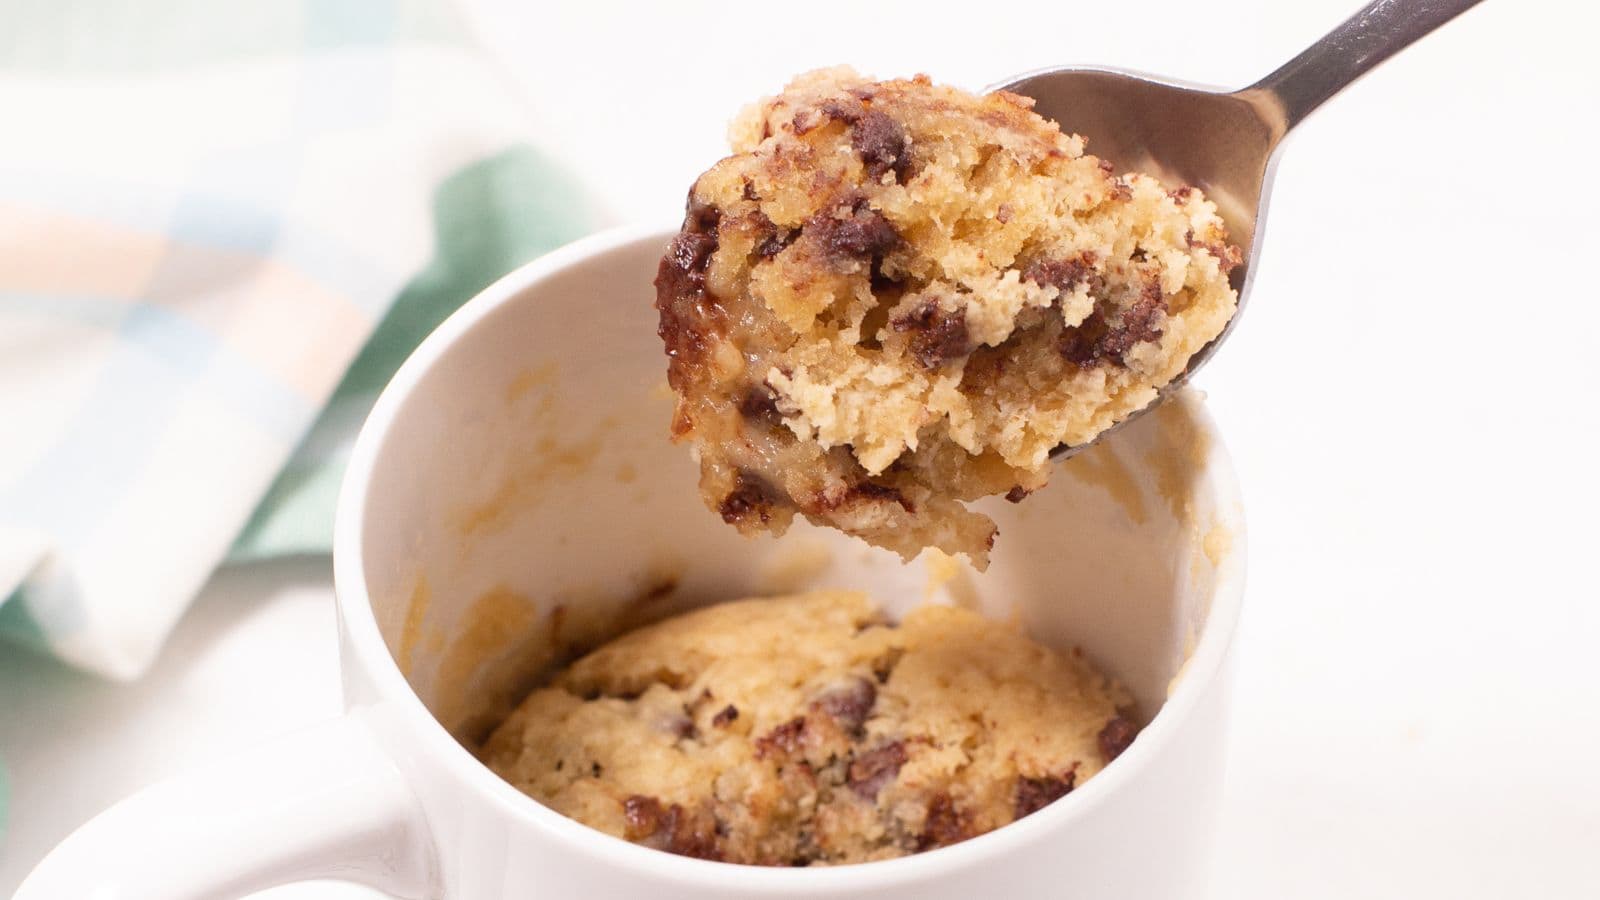 <p>Indulge in the classic combination of chocolate and vanilla with this mug cake recipe. Quick and easy to make, it’s a convenient option for satisfying your sweet tooth. With its moist texture and gooey chocolate chips, it’s a delightful treat perfect for any time of day. Whether for a quick dessert or a midnight snack, this mug cake is sure to please.<br><strong>Get the Recipe: </strong><a href="https://littlebitrecipes.com/chocolate-chip-mug-cake/?utm_source=msn&utm_medium=page&utm_campaign=msn">Chocolate Chip Mug Cake</a></p> <p>The post <a href="https://tastesdelicious.com/small-sized-treats-you-cant-overeat/">20 Small Sized Treats You Can’t Overeat</a> appeared first on <a href="https://tastesdelicious.com">Tastes Delicious</a>.</p>